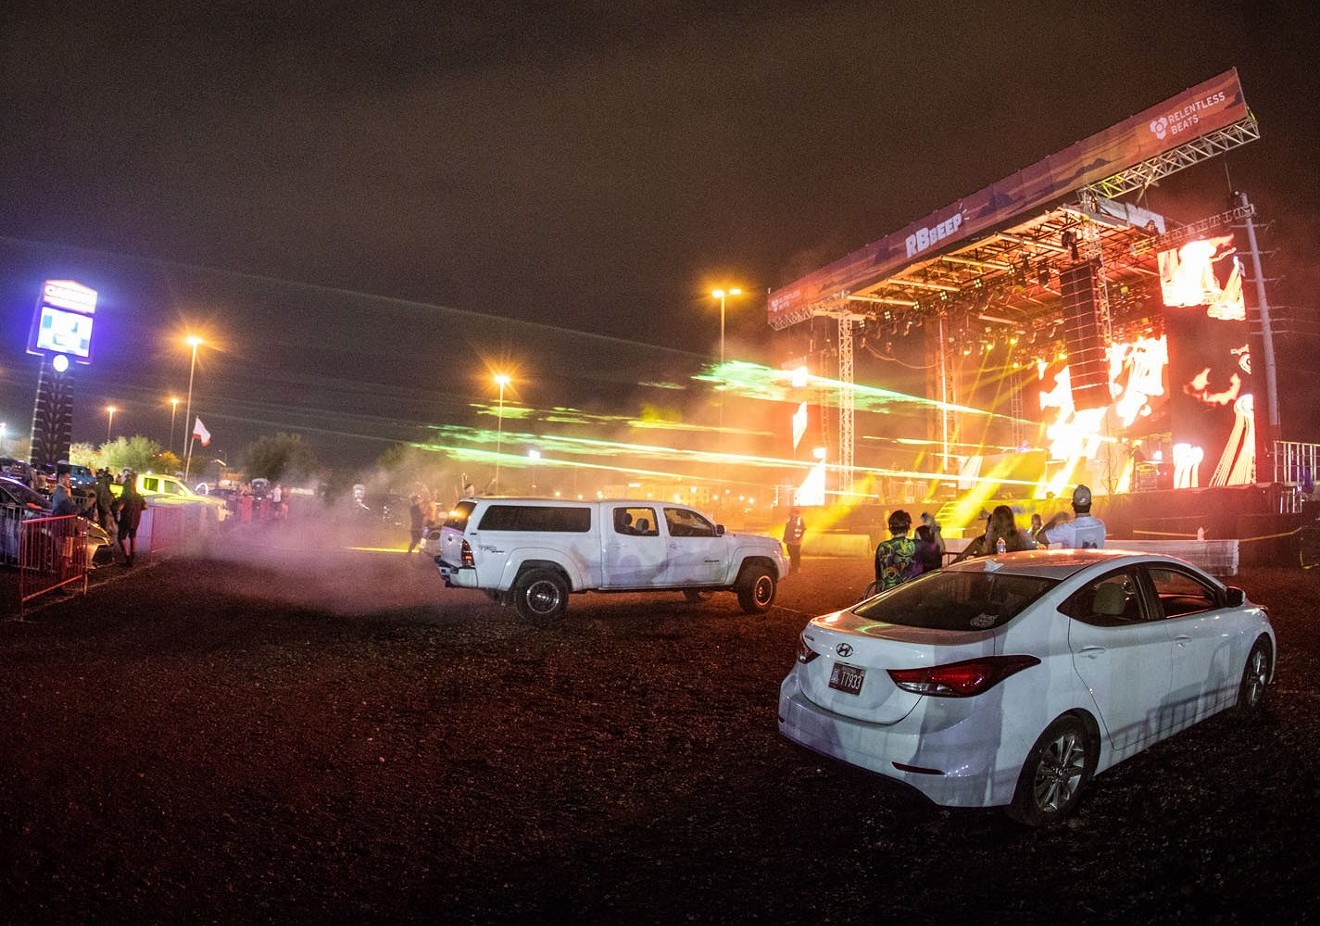 The scene at Relentless Beats' last drive-in EDM event in May.